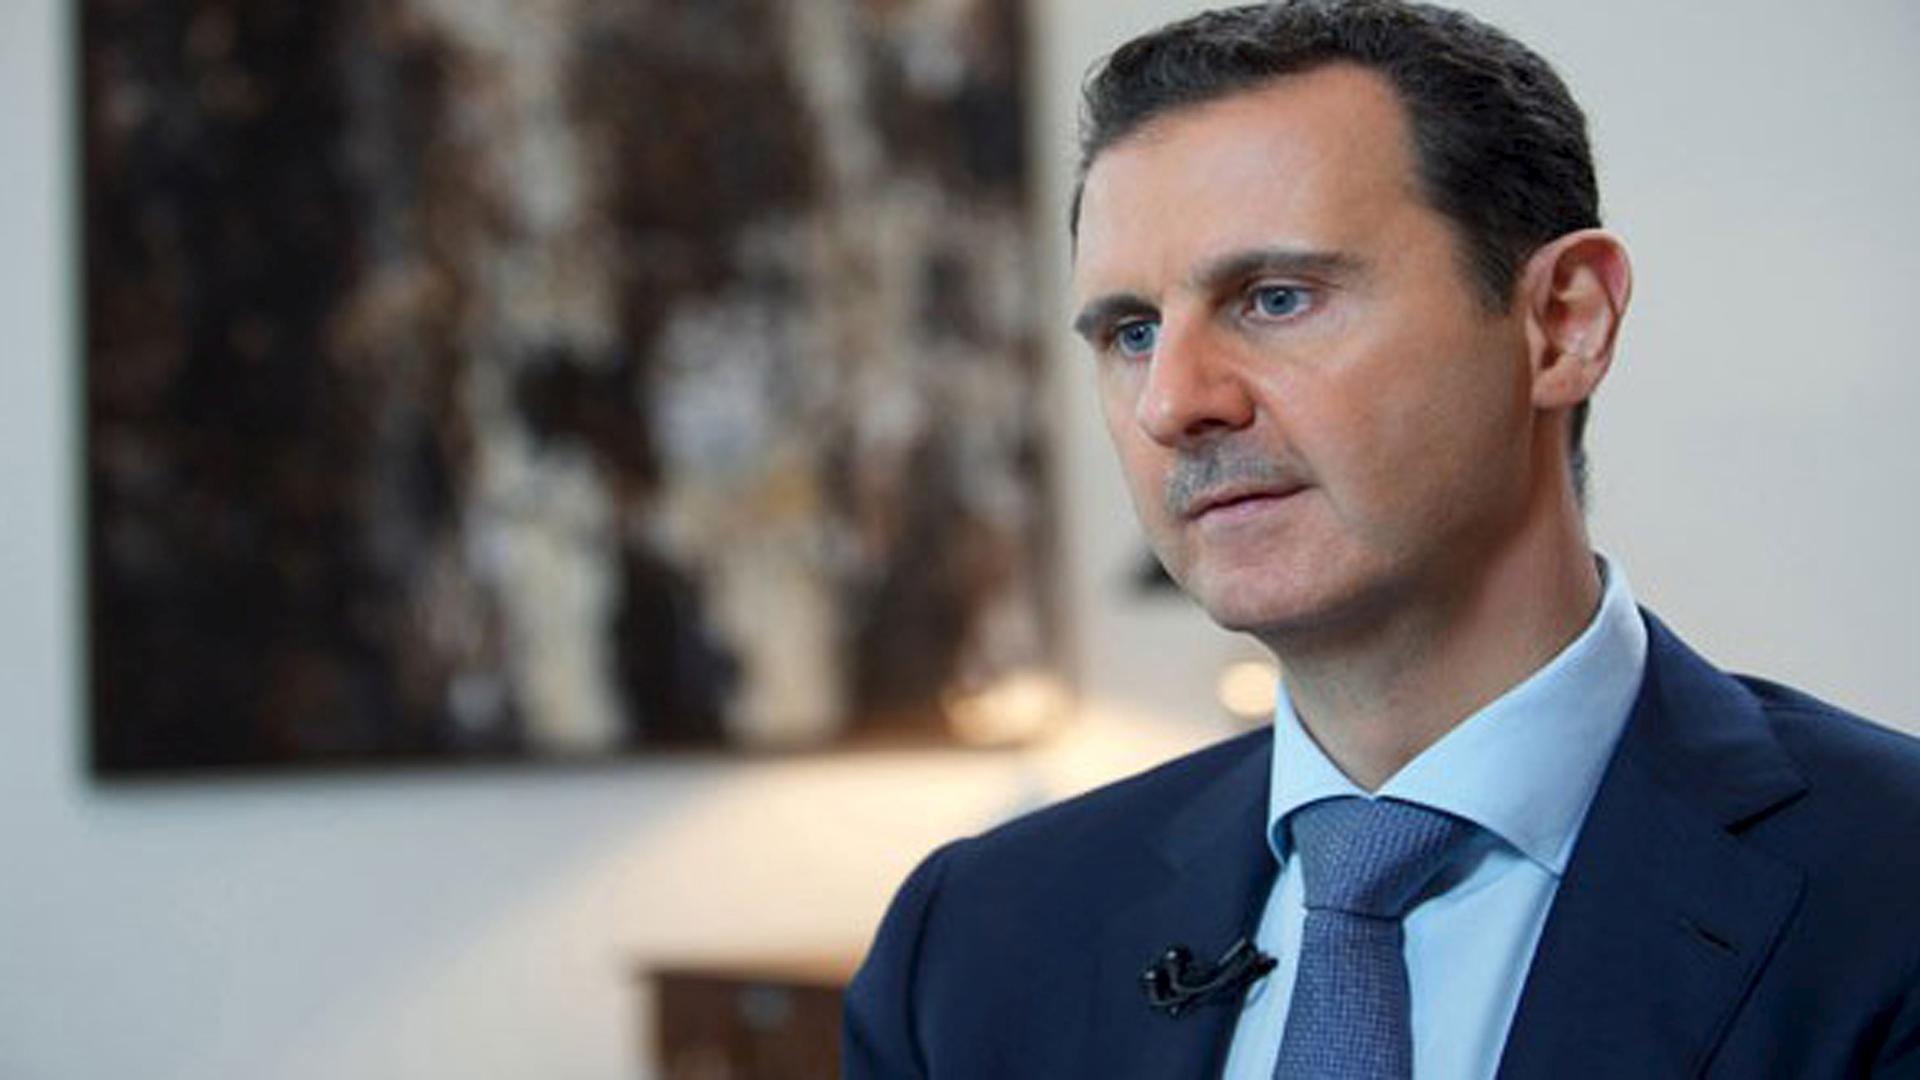 Syria's President Bashar al-Assad during an interview in 2015